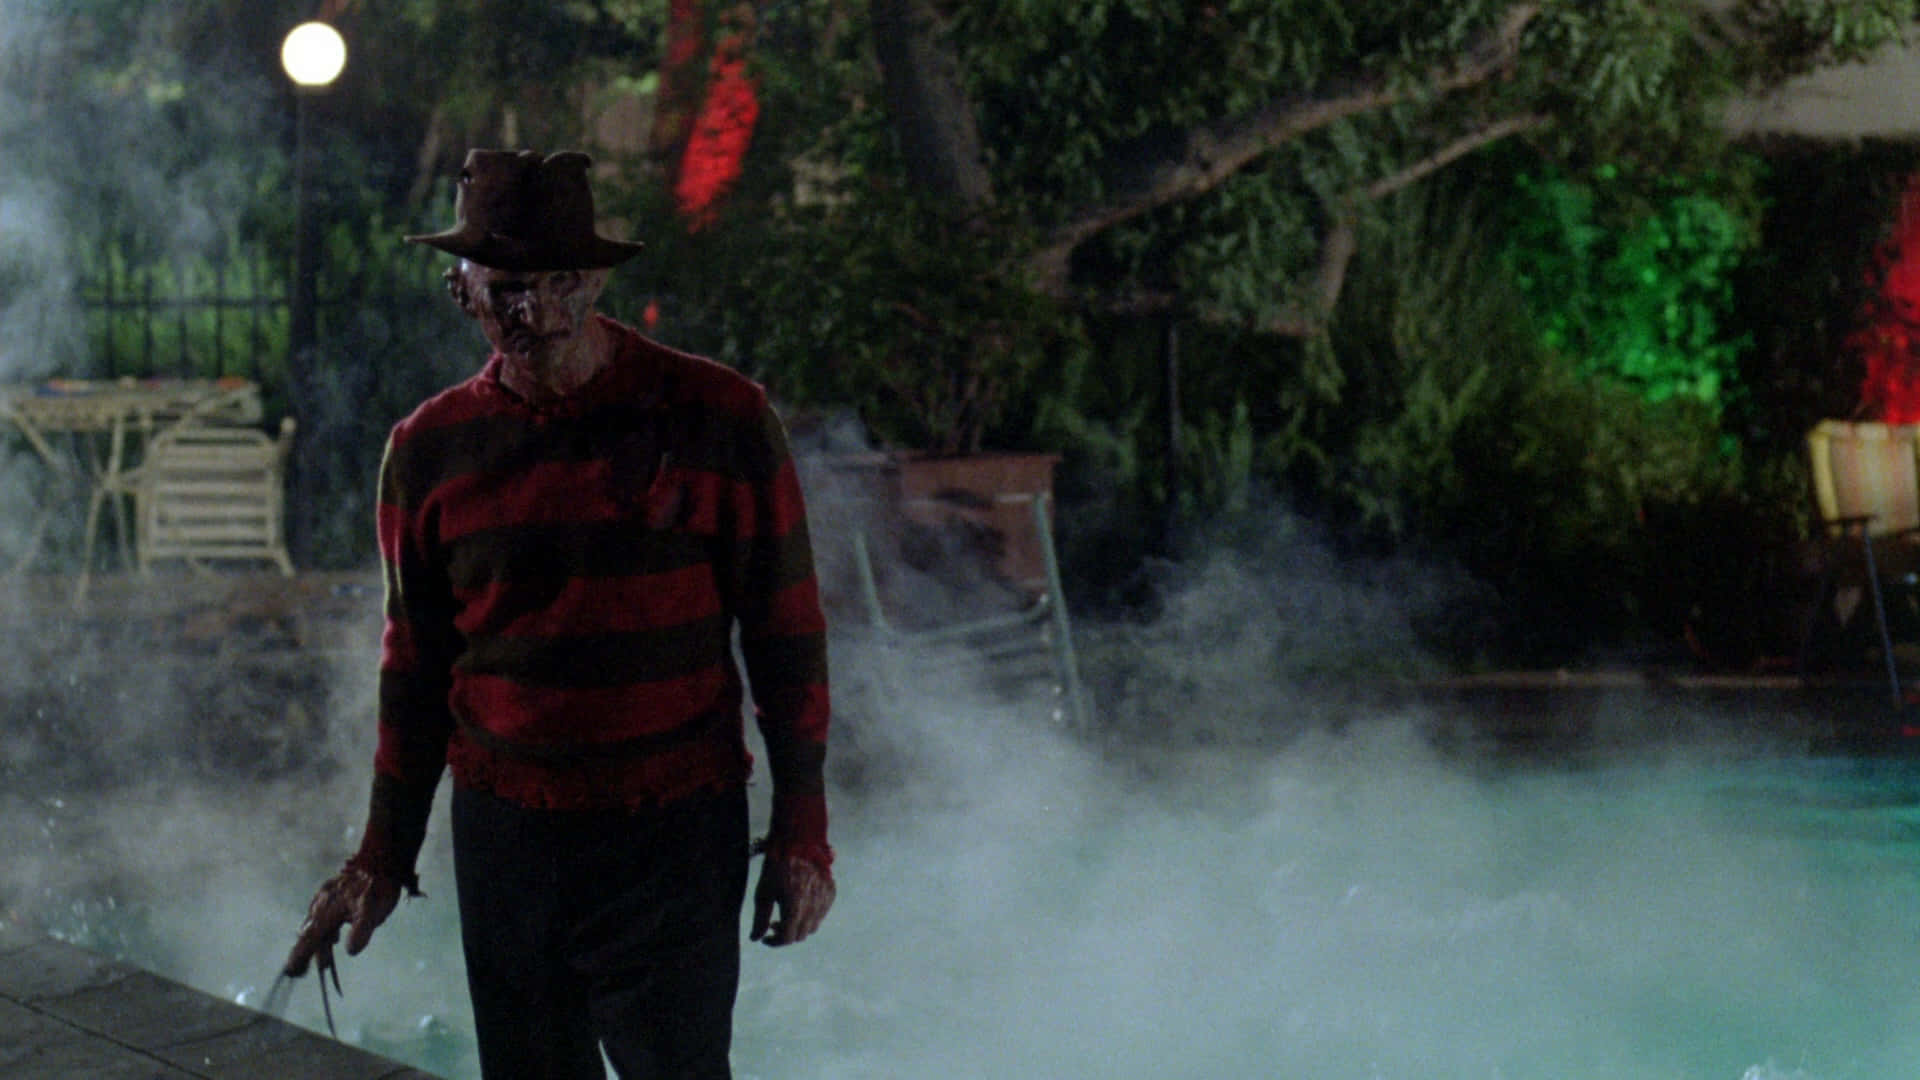 The Iconic Freddy Krueger Haunting Dreams in Front of his Boiler Room Lair